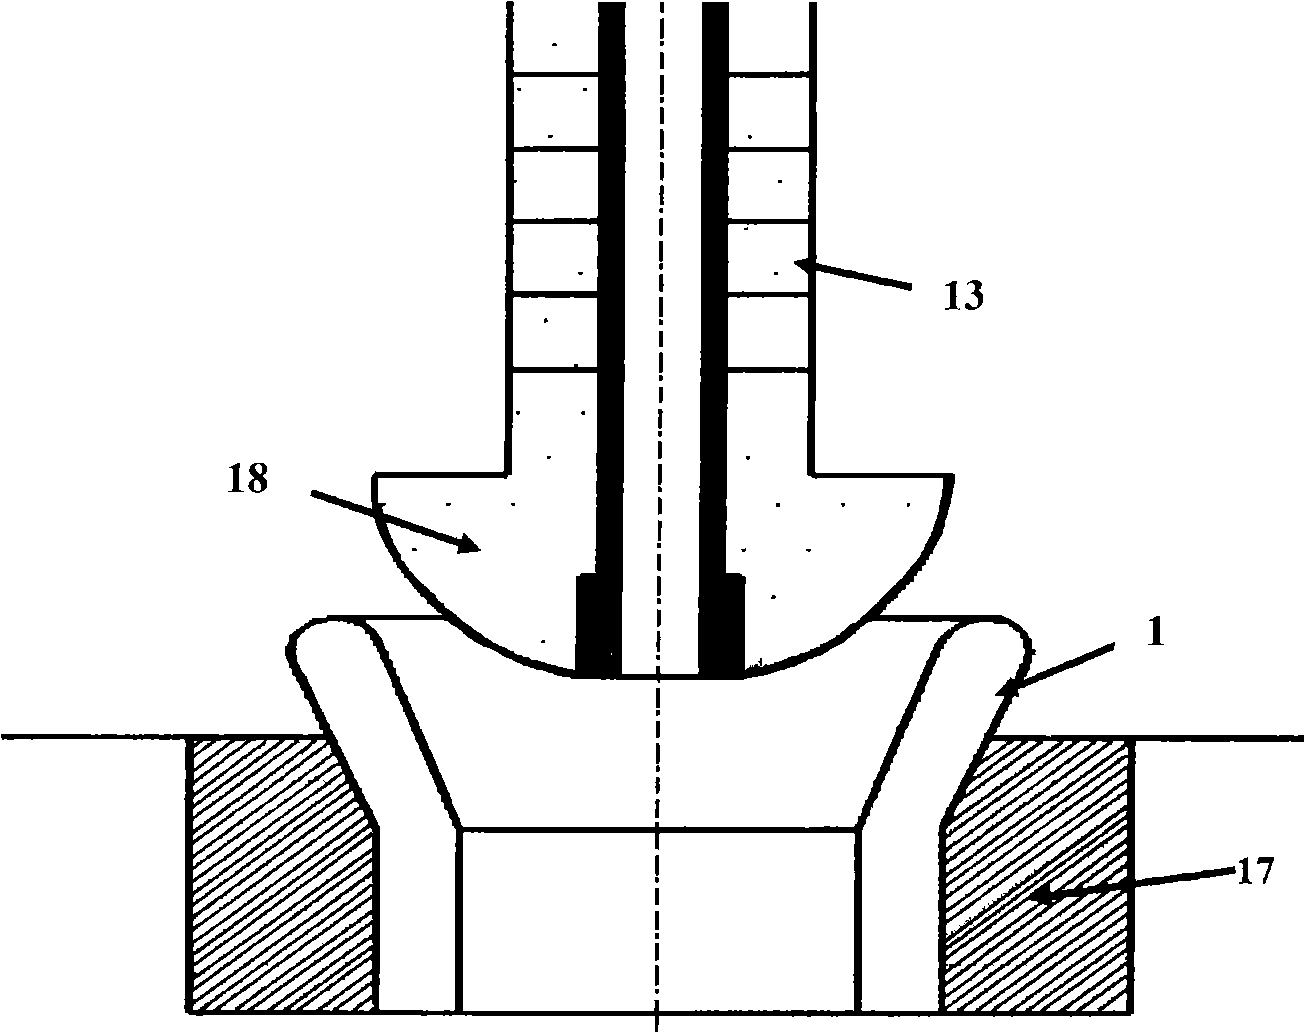 Secondary refining method of 10 to 30 tons bottom breakout ladle